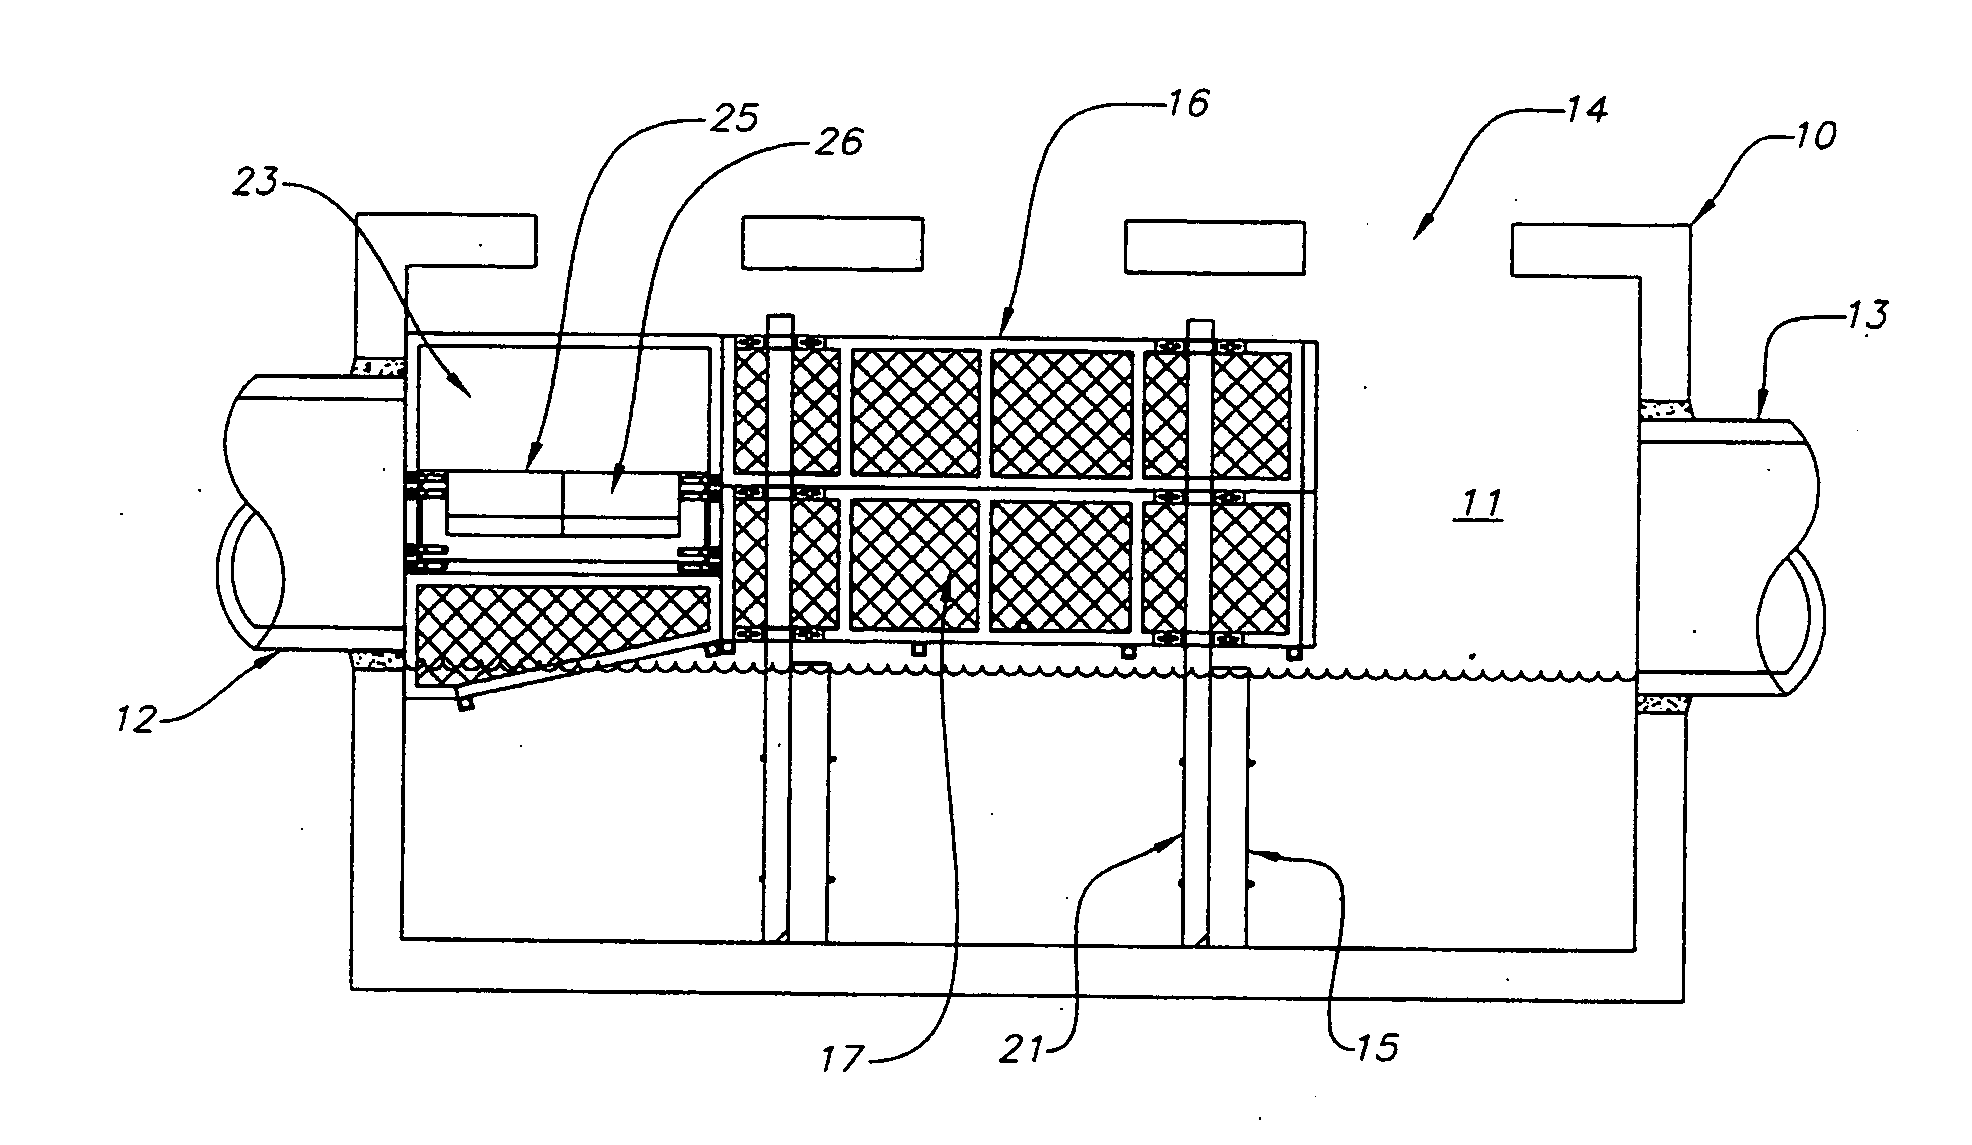 Storm water filter basket with floating bypass panels